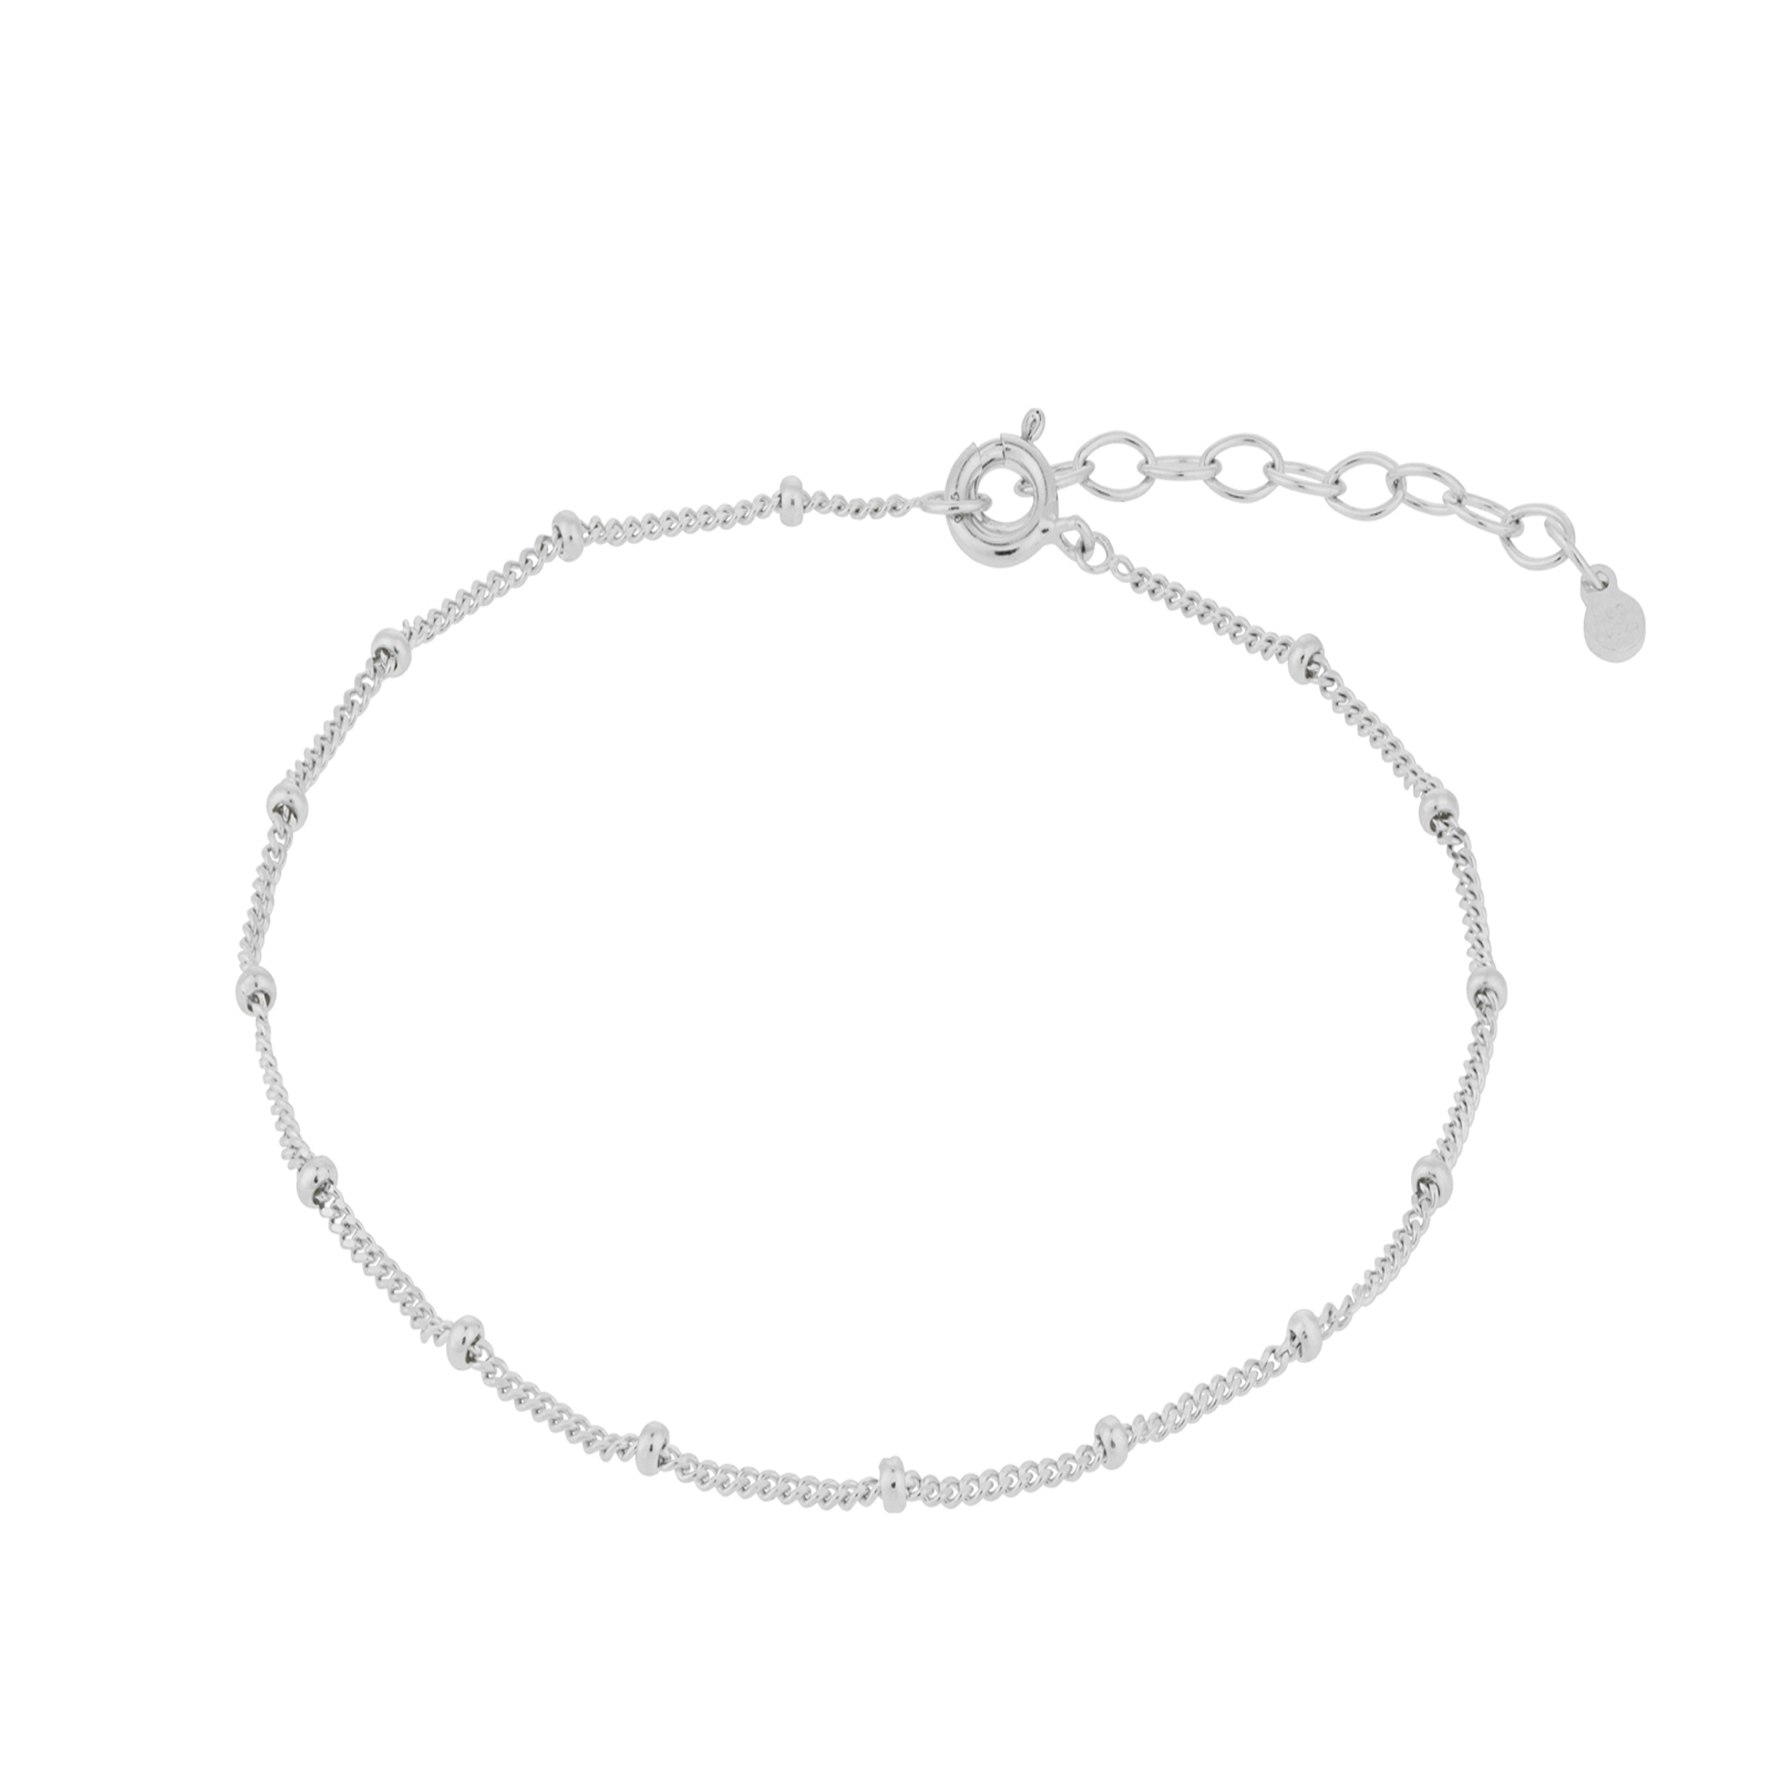 Solar Anklet from Pernille Corydon in Silver Sterling 925